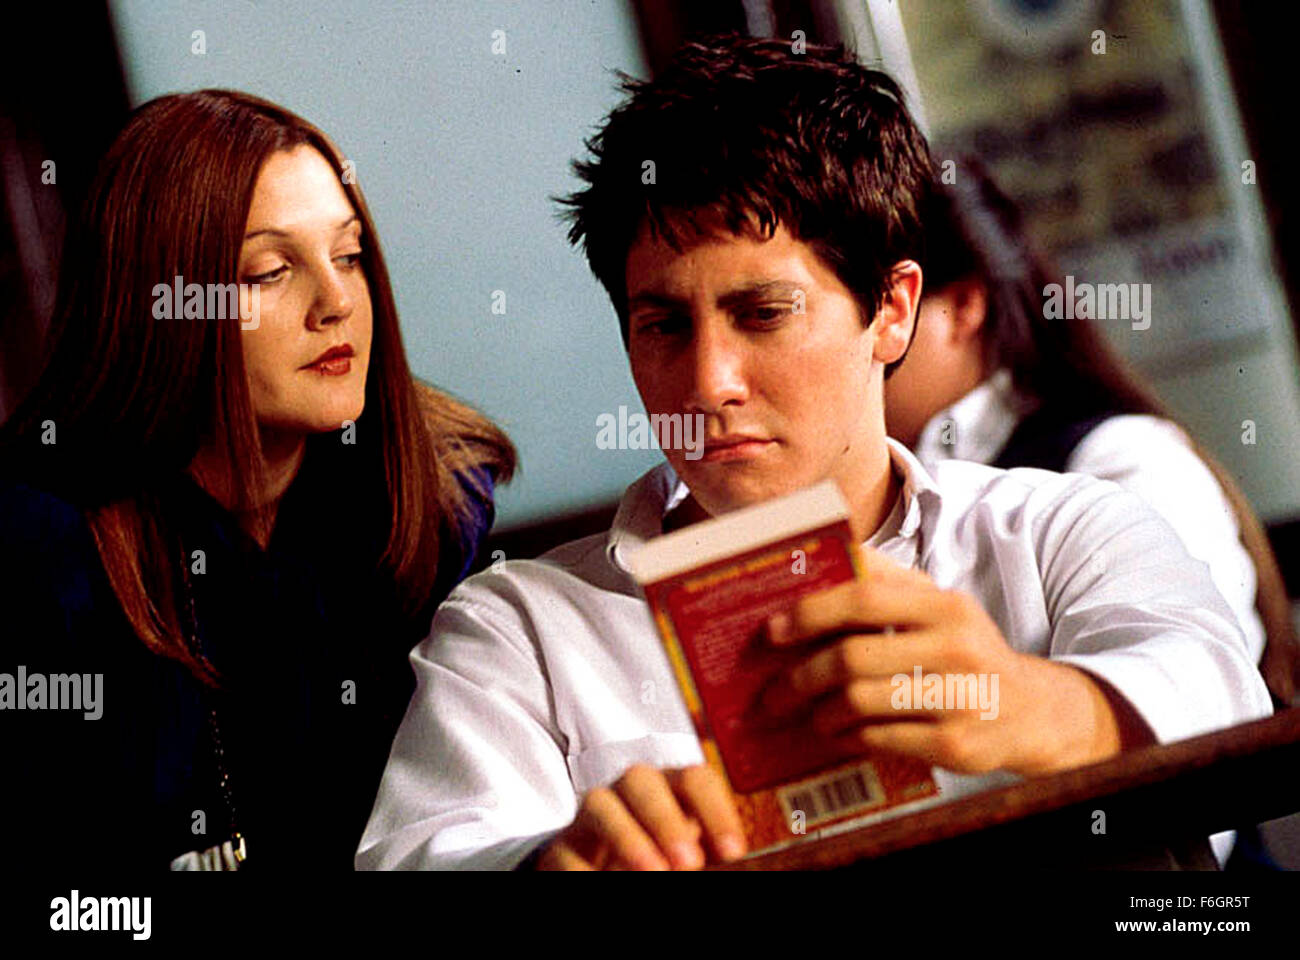 Jan 19, 2001; Los Angeles, CA, USA; DREW BARRYMORE and JAKE GYLLENHAAL star as Karen Pomeroy and Donnie Darko in the thrilling sci-fi drama 'Donnie Darko' directed by Richard Kelly. Stock Photo